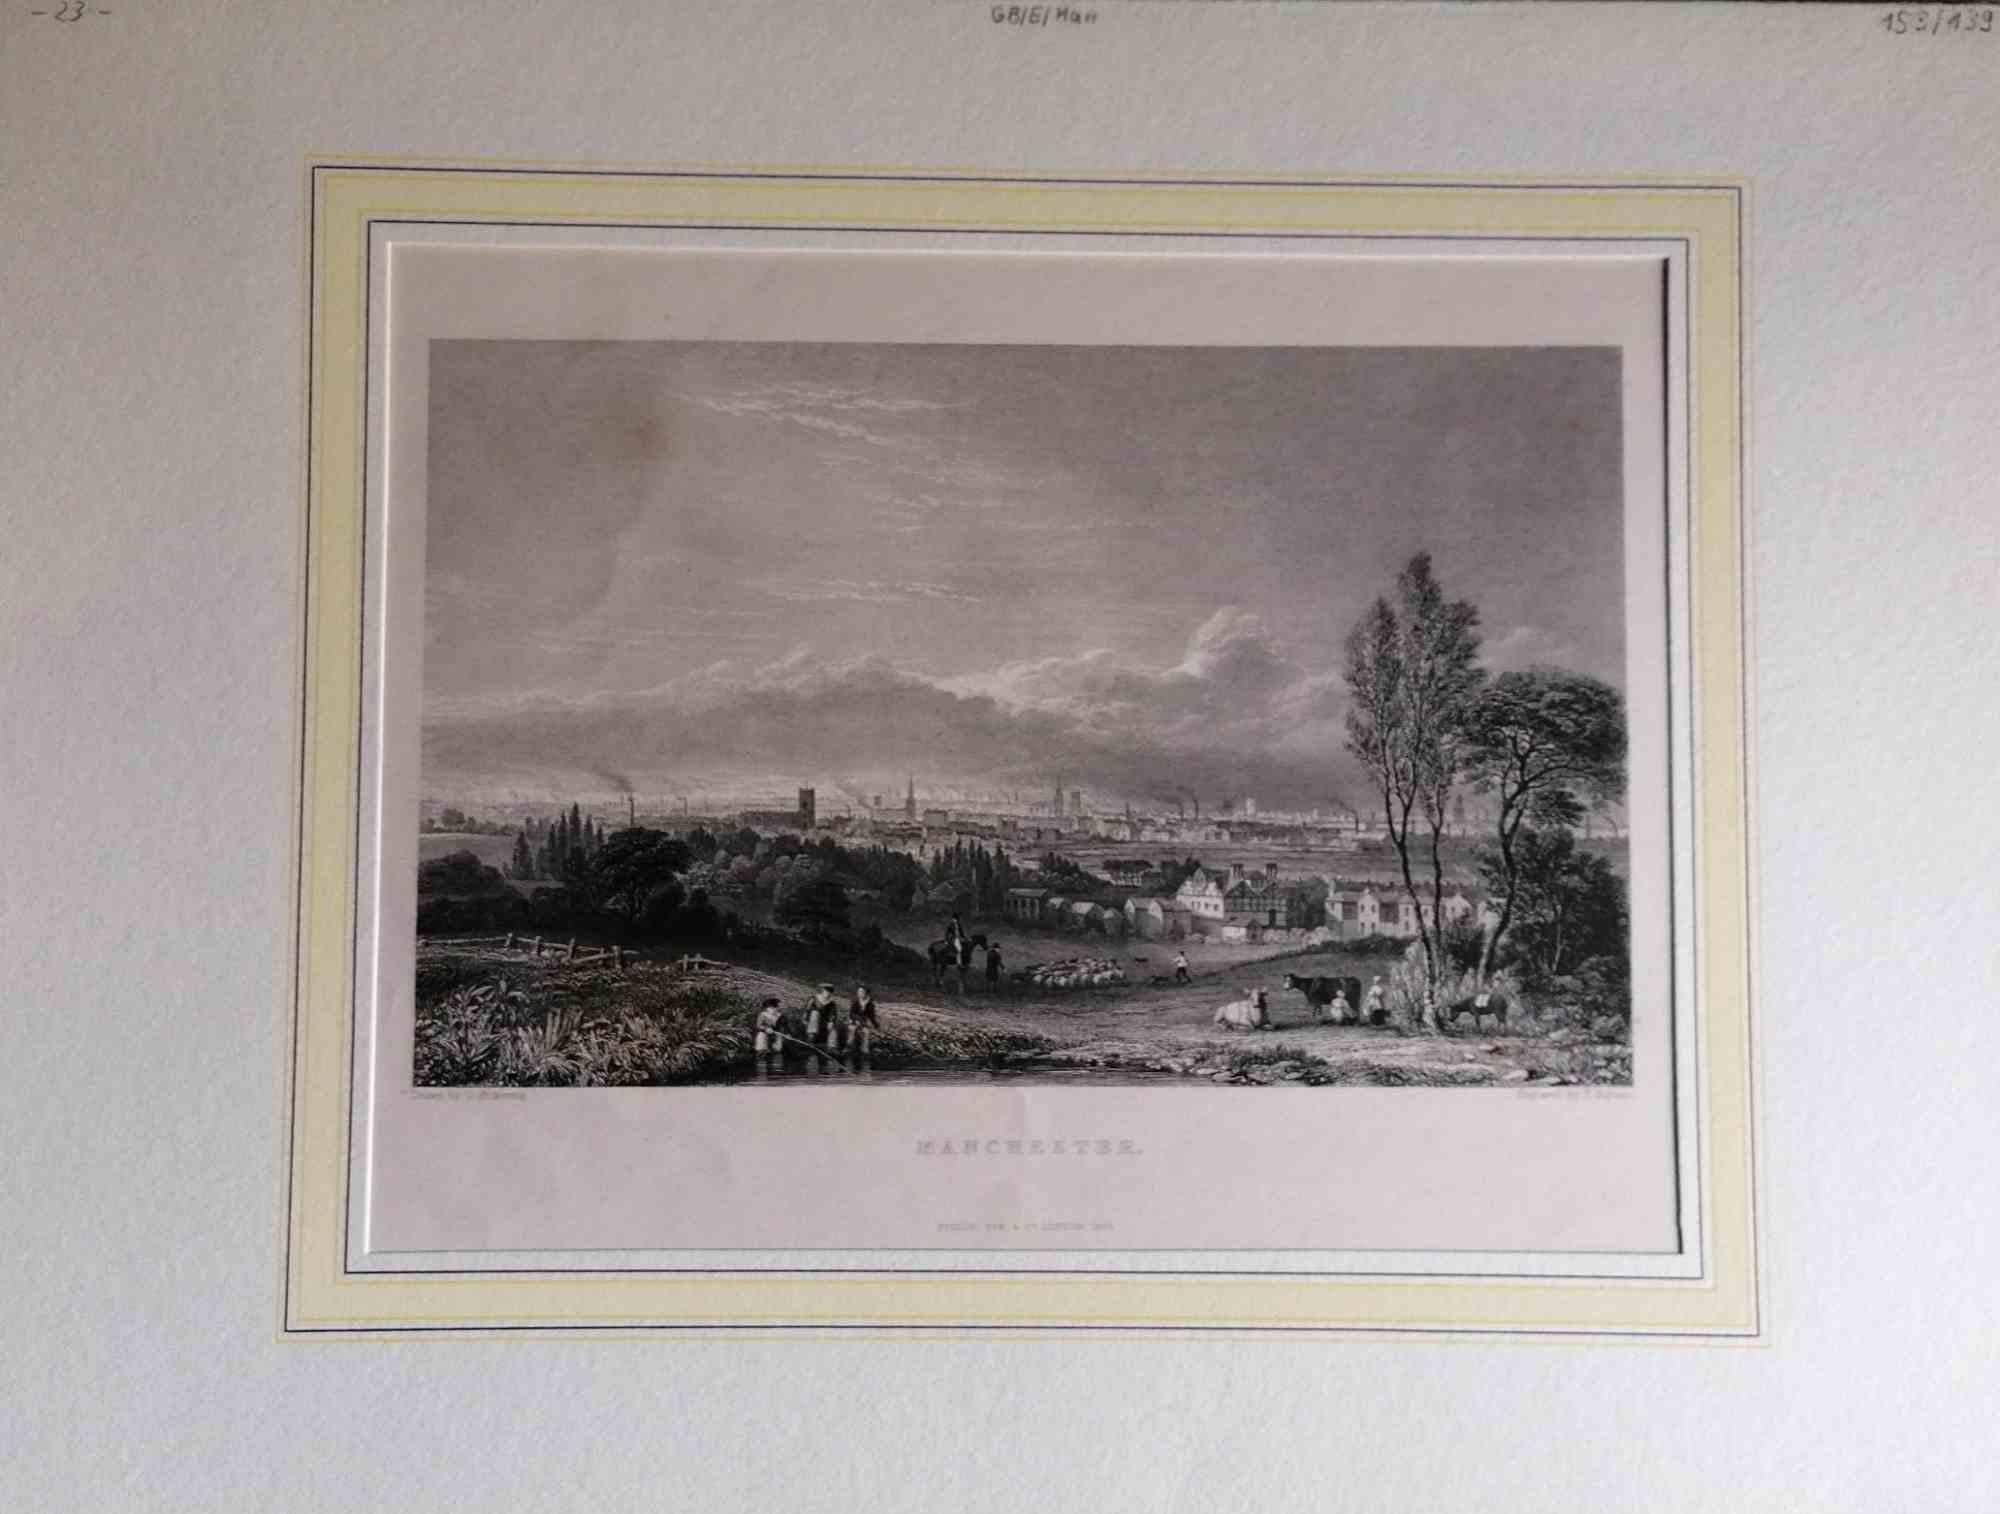 Unknown Figurative Print - Ancient View of Manchester - Original Lithograph - Mid-19th Century